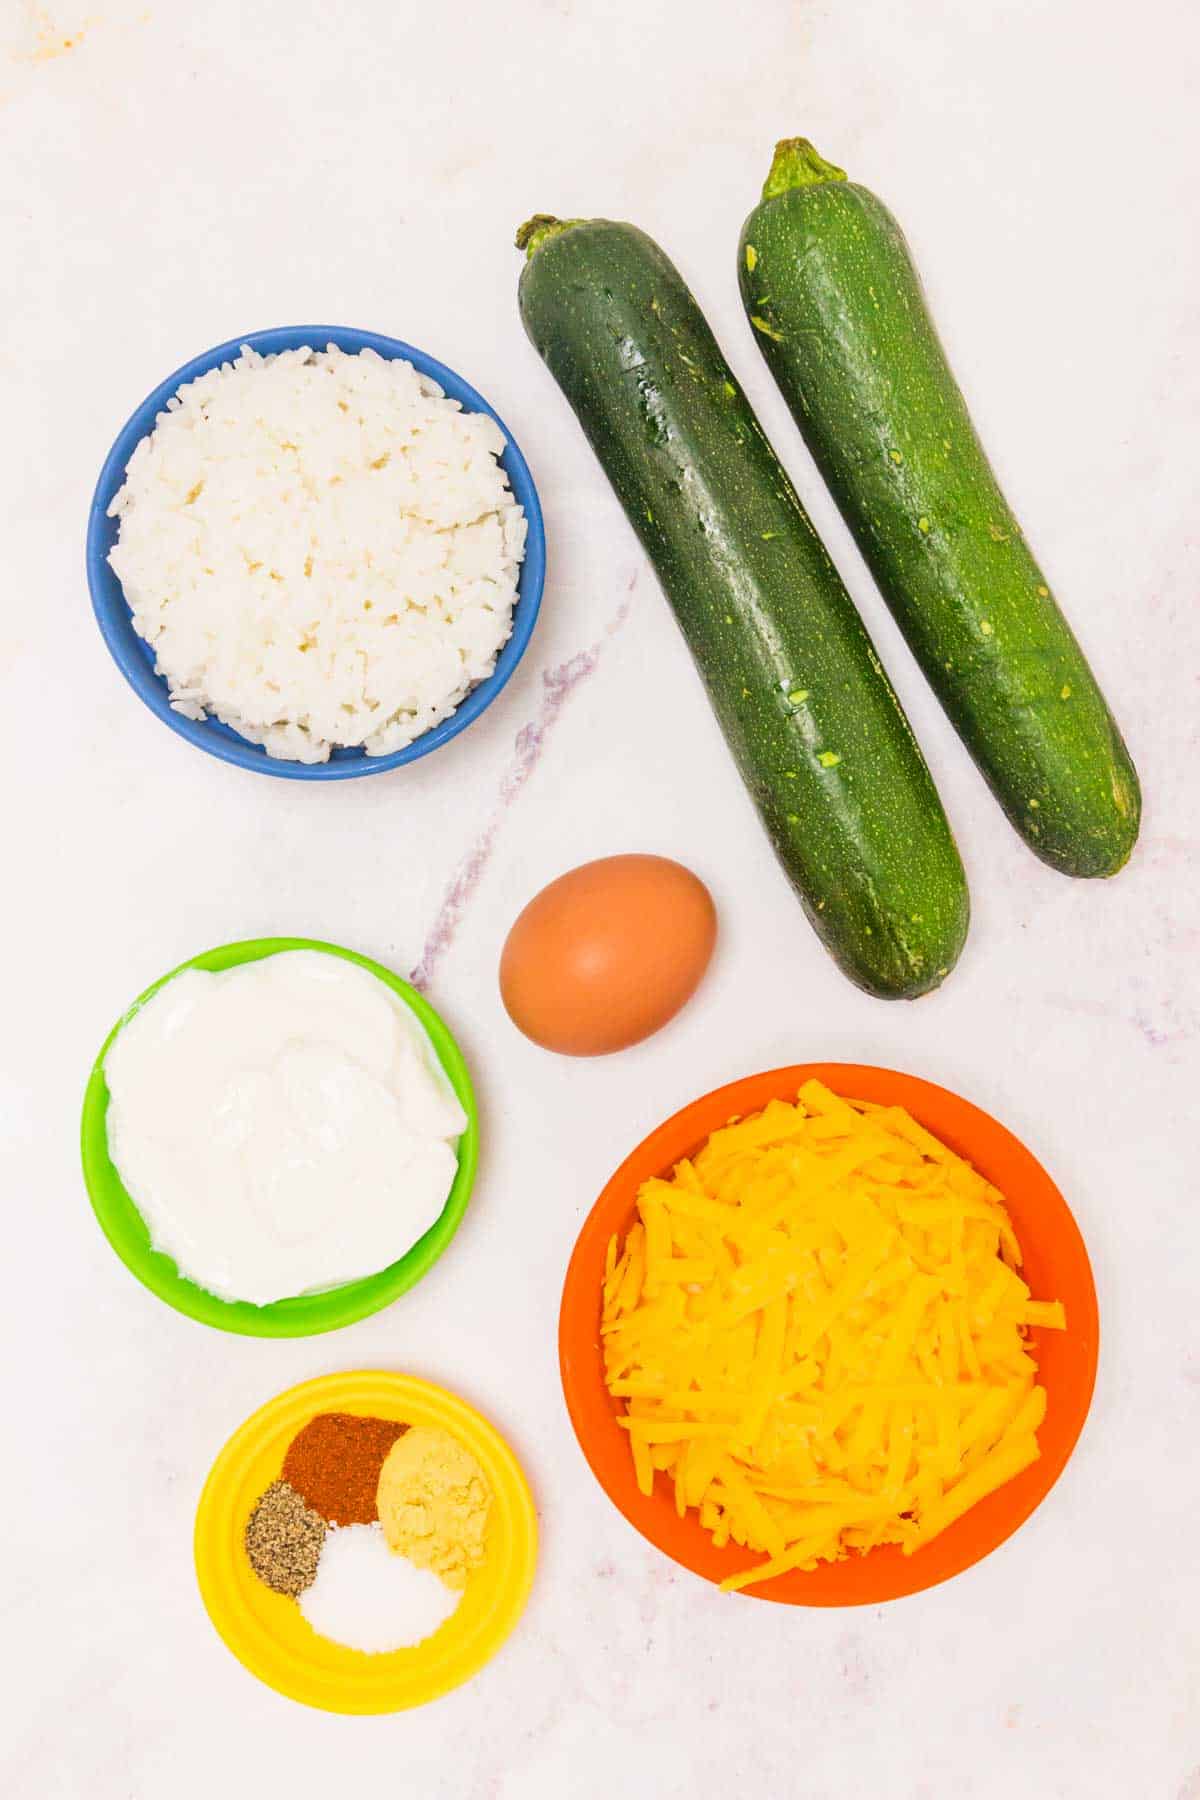 Ingredients for a zucchini casserole on a marble countertop.